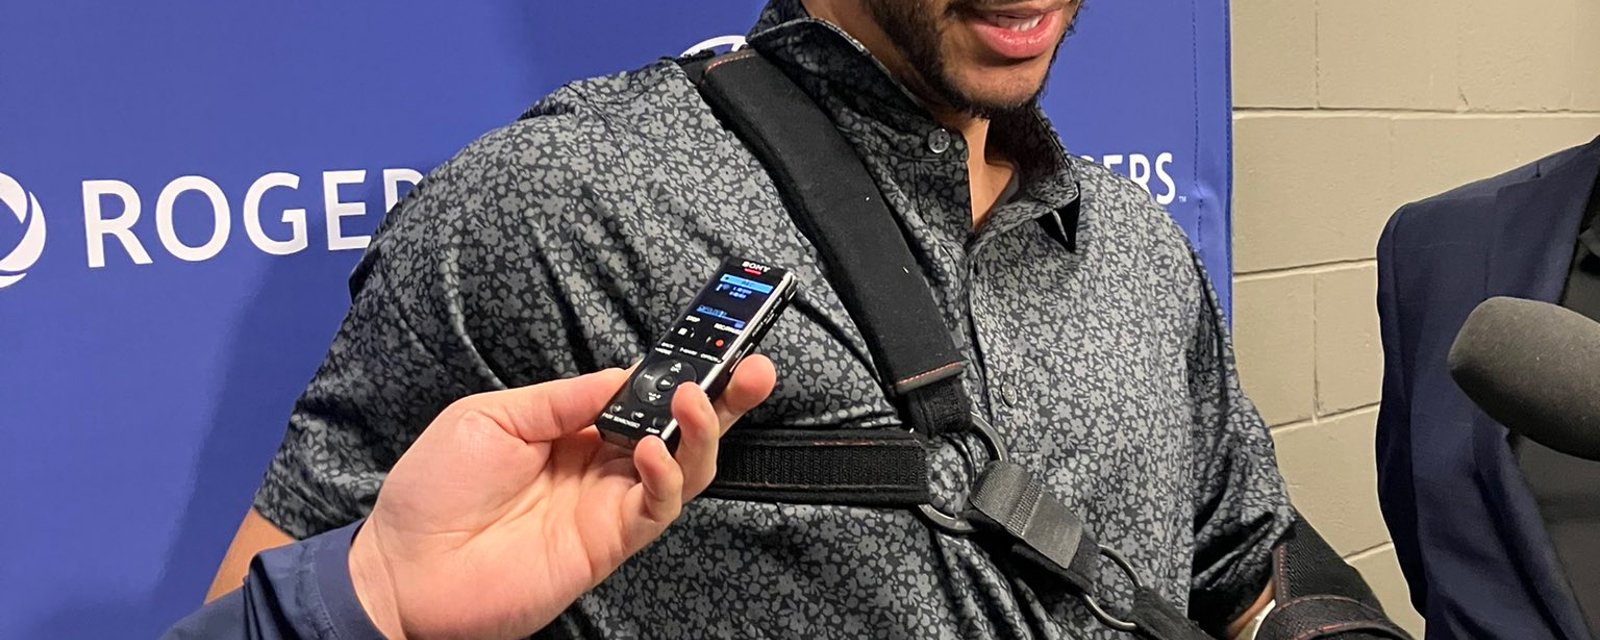 Evander Kane reveals gruesome details on wrist cut as he faces media for the first time since